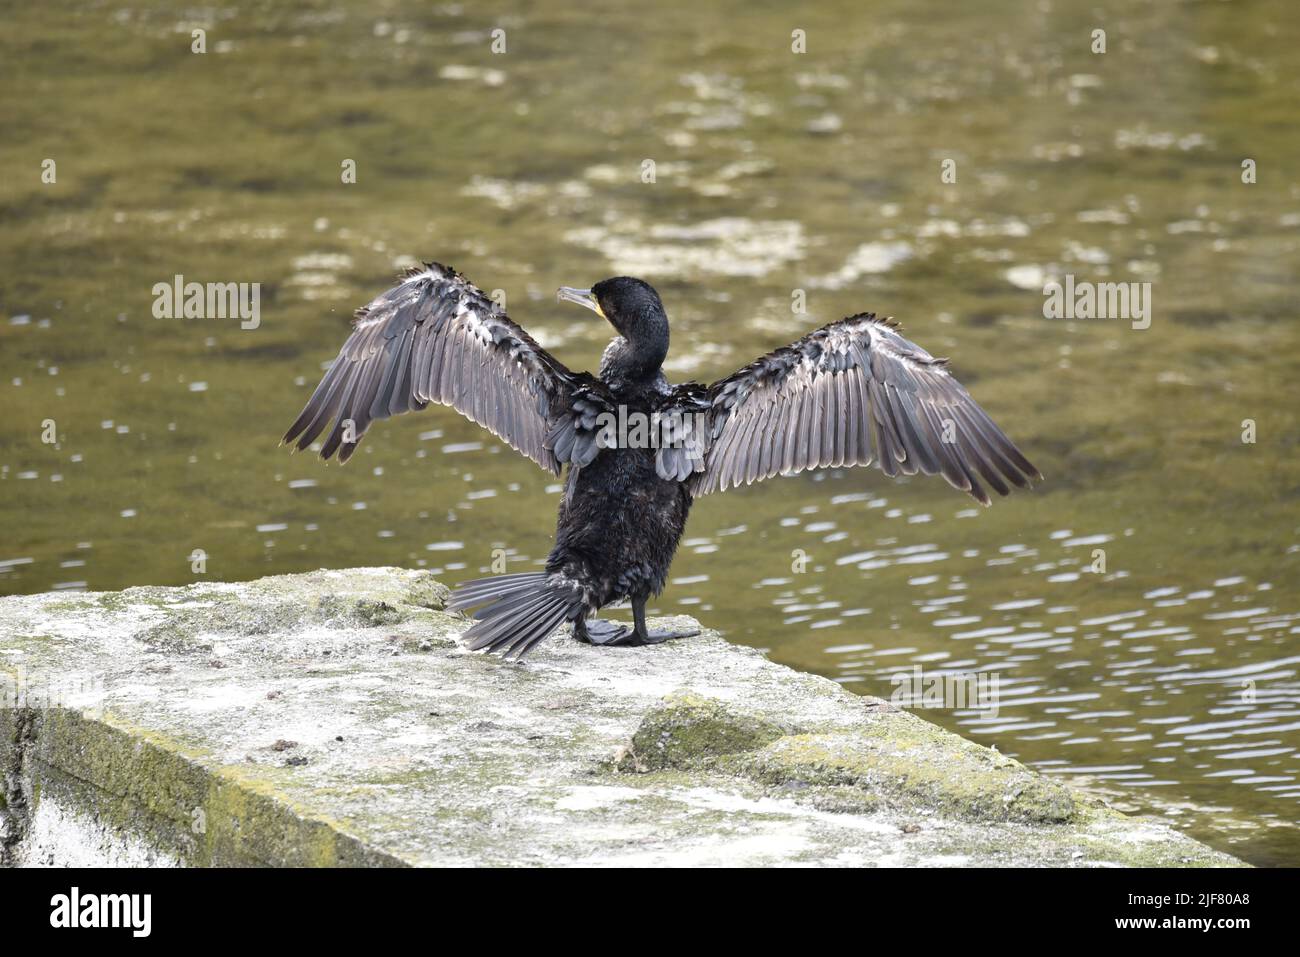 Close-Up Rear View of an Immature Great Cormorant (Phalacrocorax carbo) with Wings Open and Head Turned to Left, Standing on a Lake Concrete Platform Stock Photo